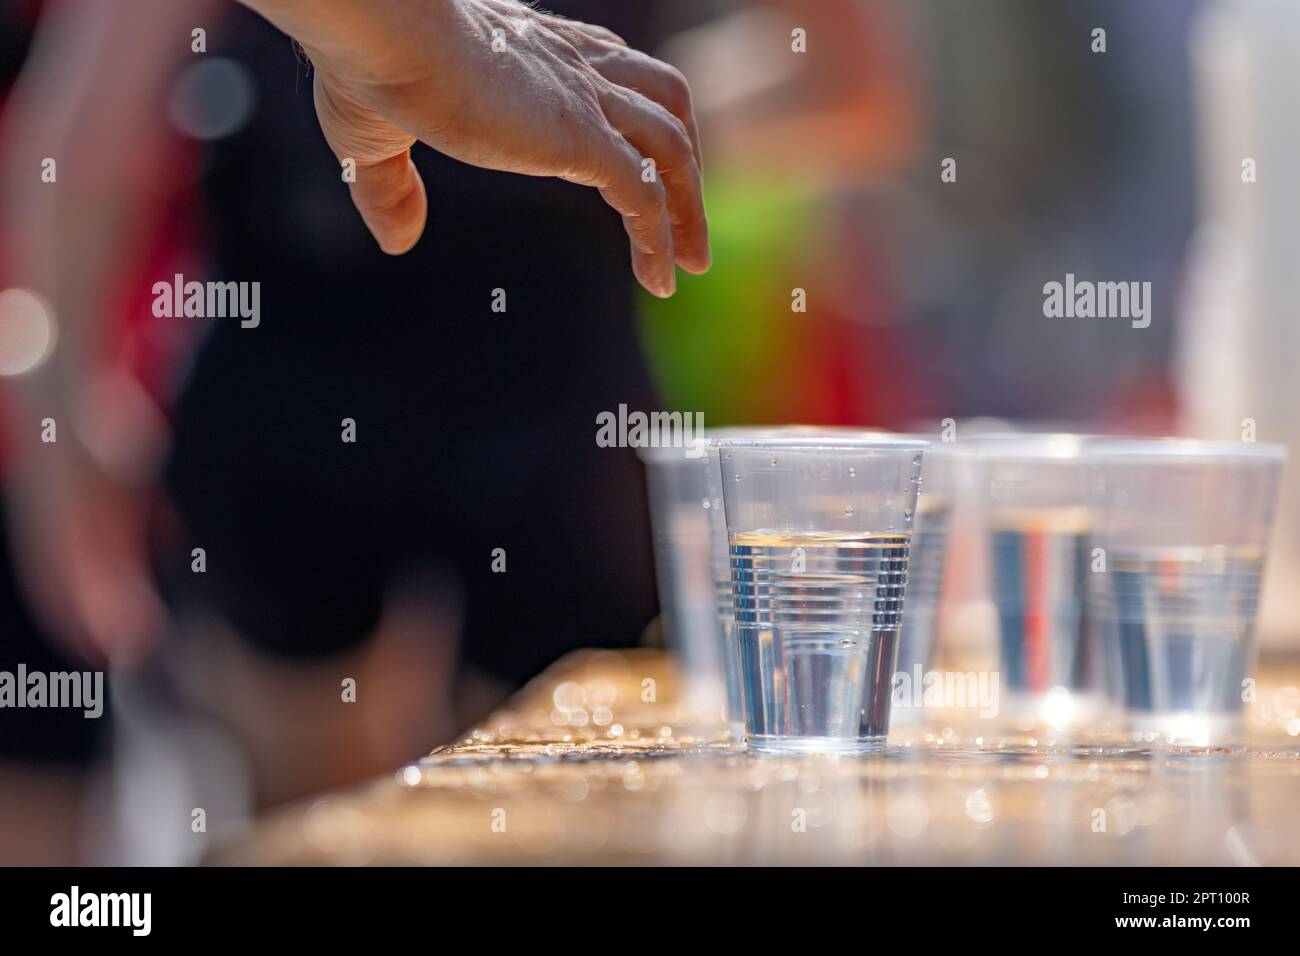 hand of a marathon runner reaches for plastic cup with water Stock Photo